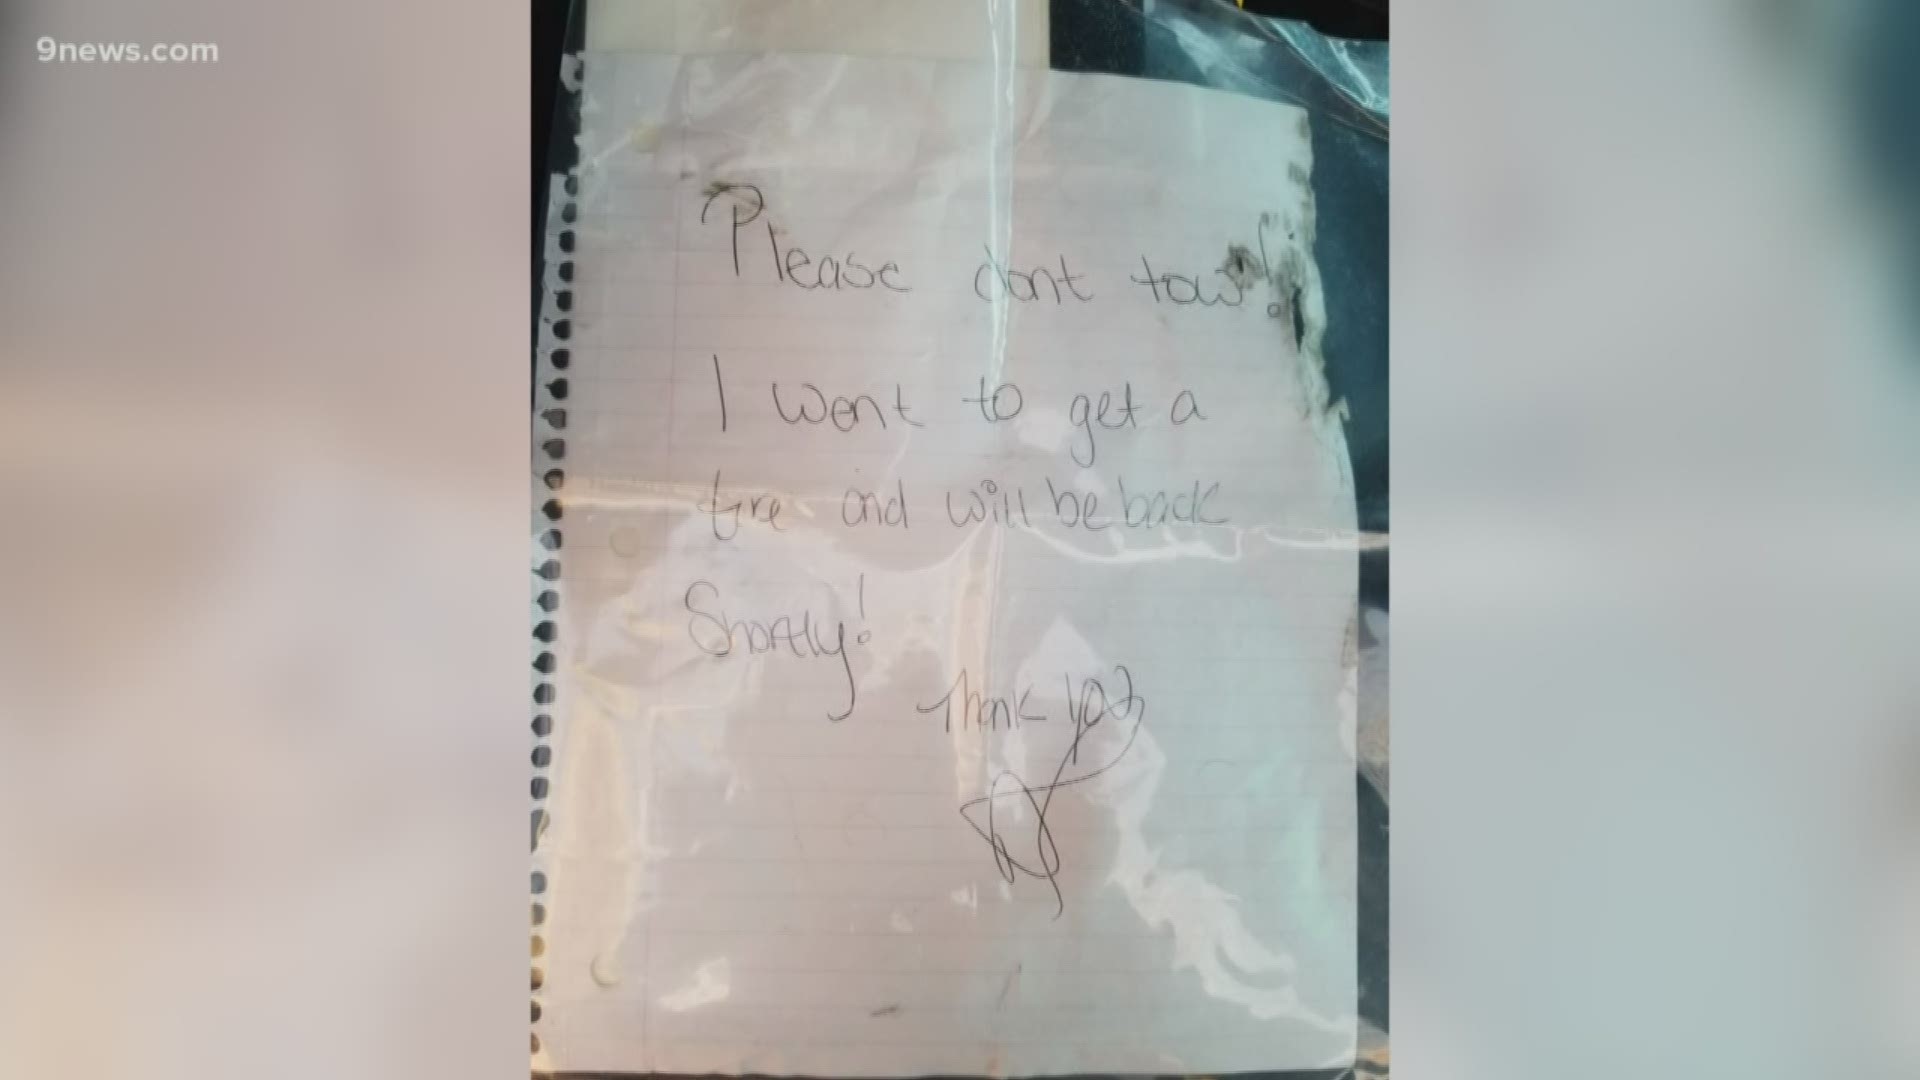 The note found on the car reported stolen out of Denver also asked that the car not be towed, according to Arvada Police.